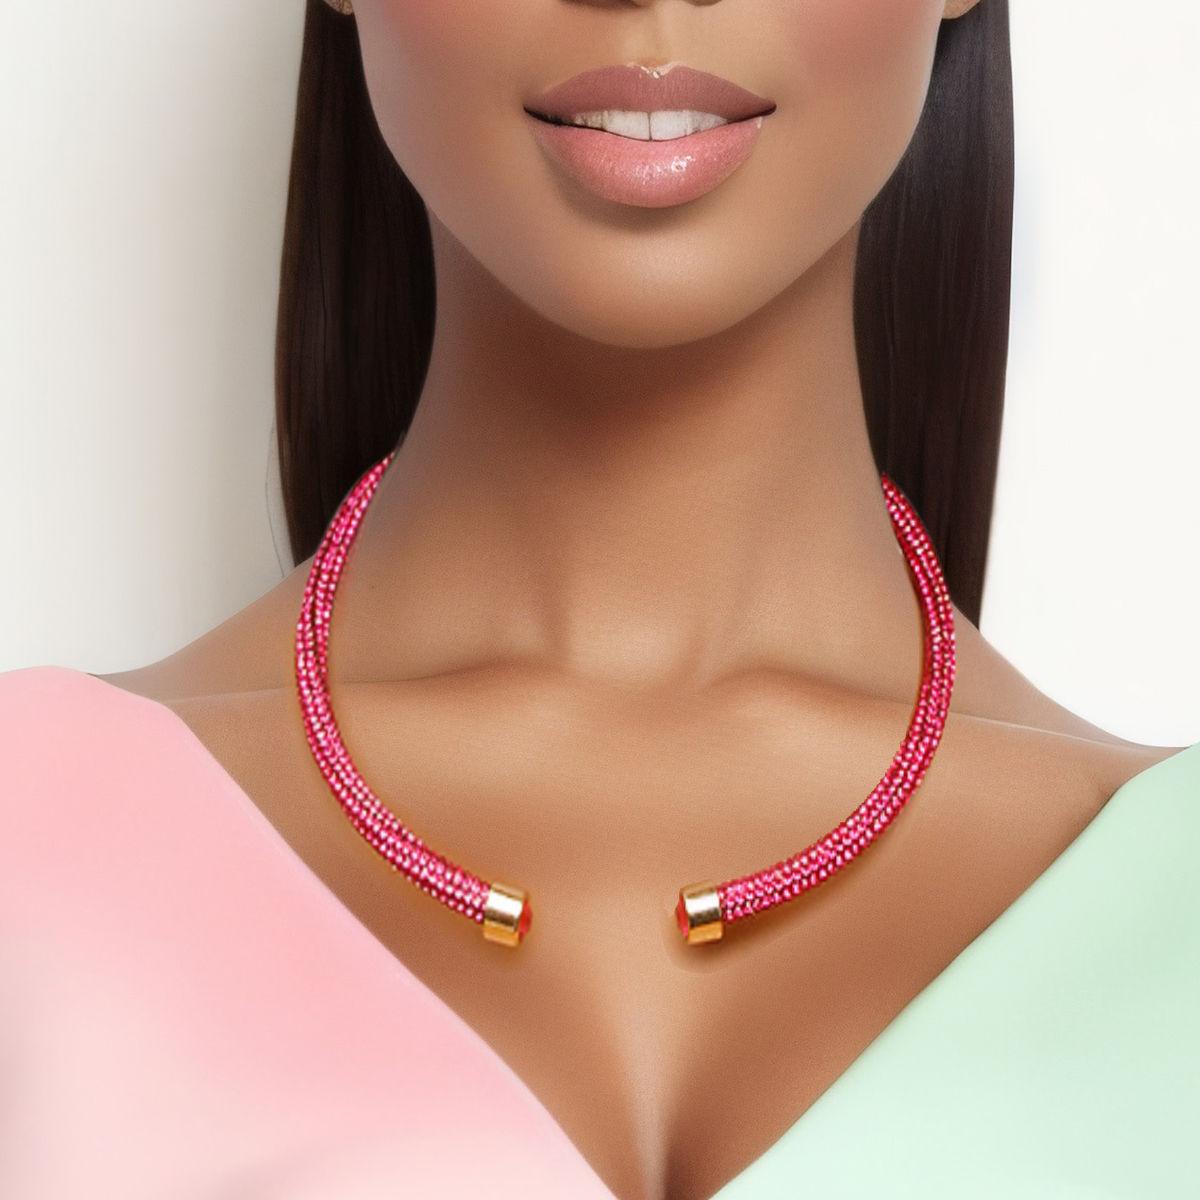 Sparkle with Style: Pink Rhinestone Choker Necklace - Get Glam Now!